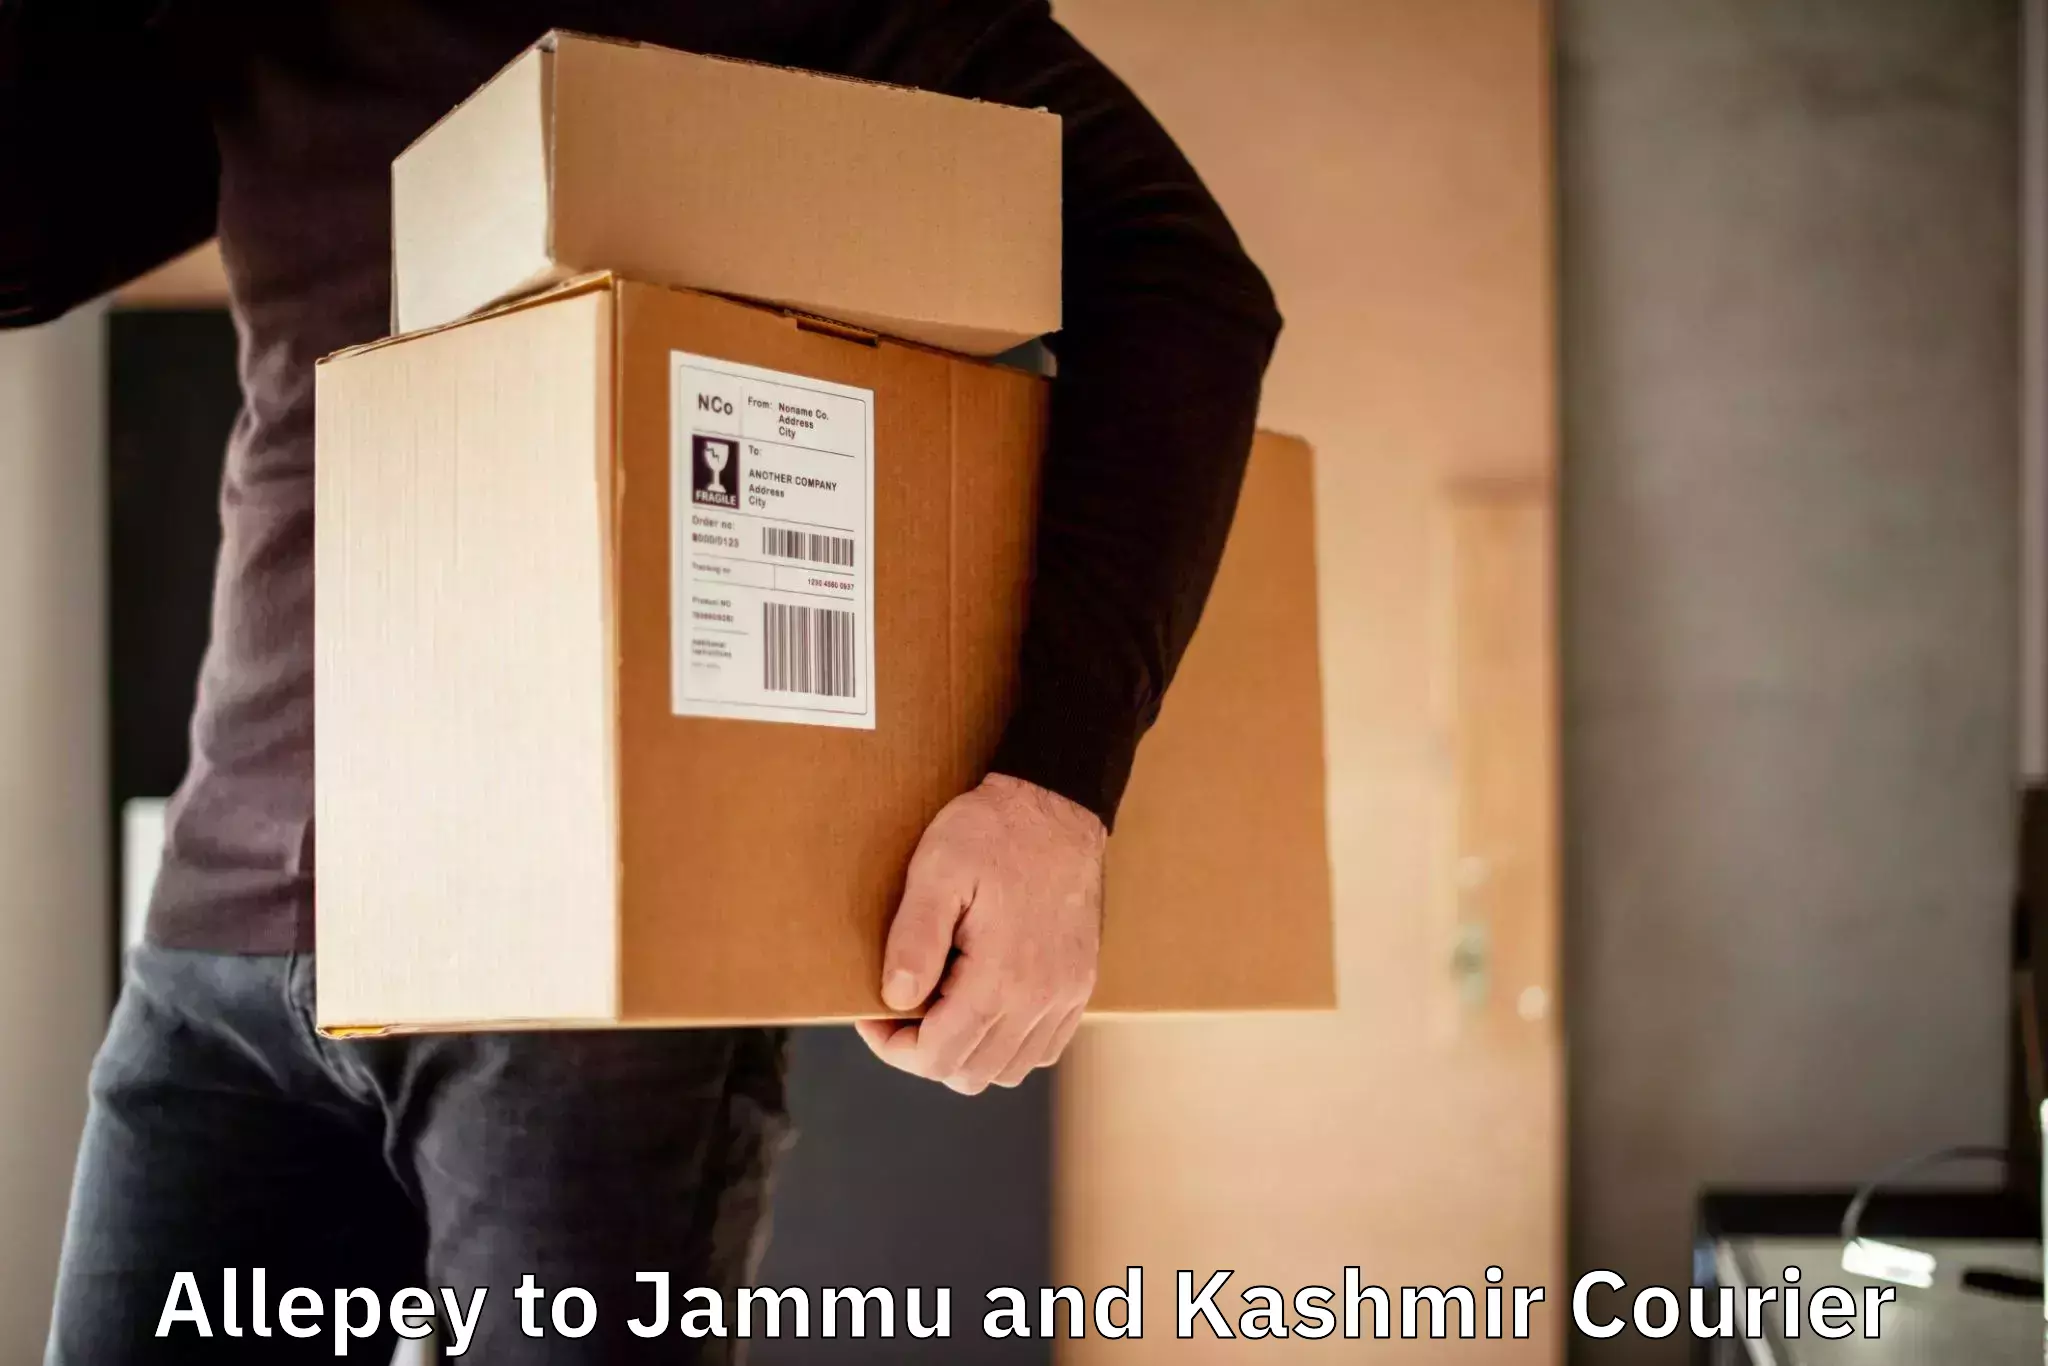 Customer-centric shipping Allepey to Pulwama